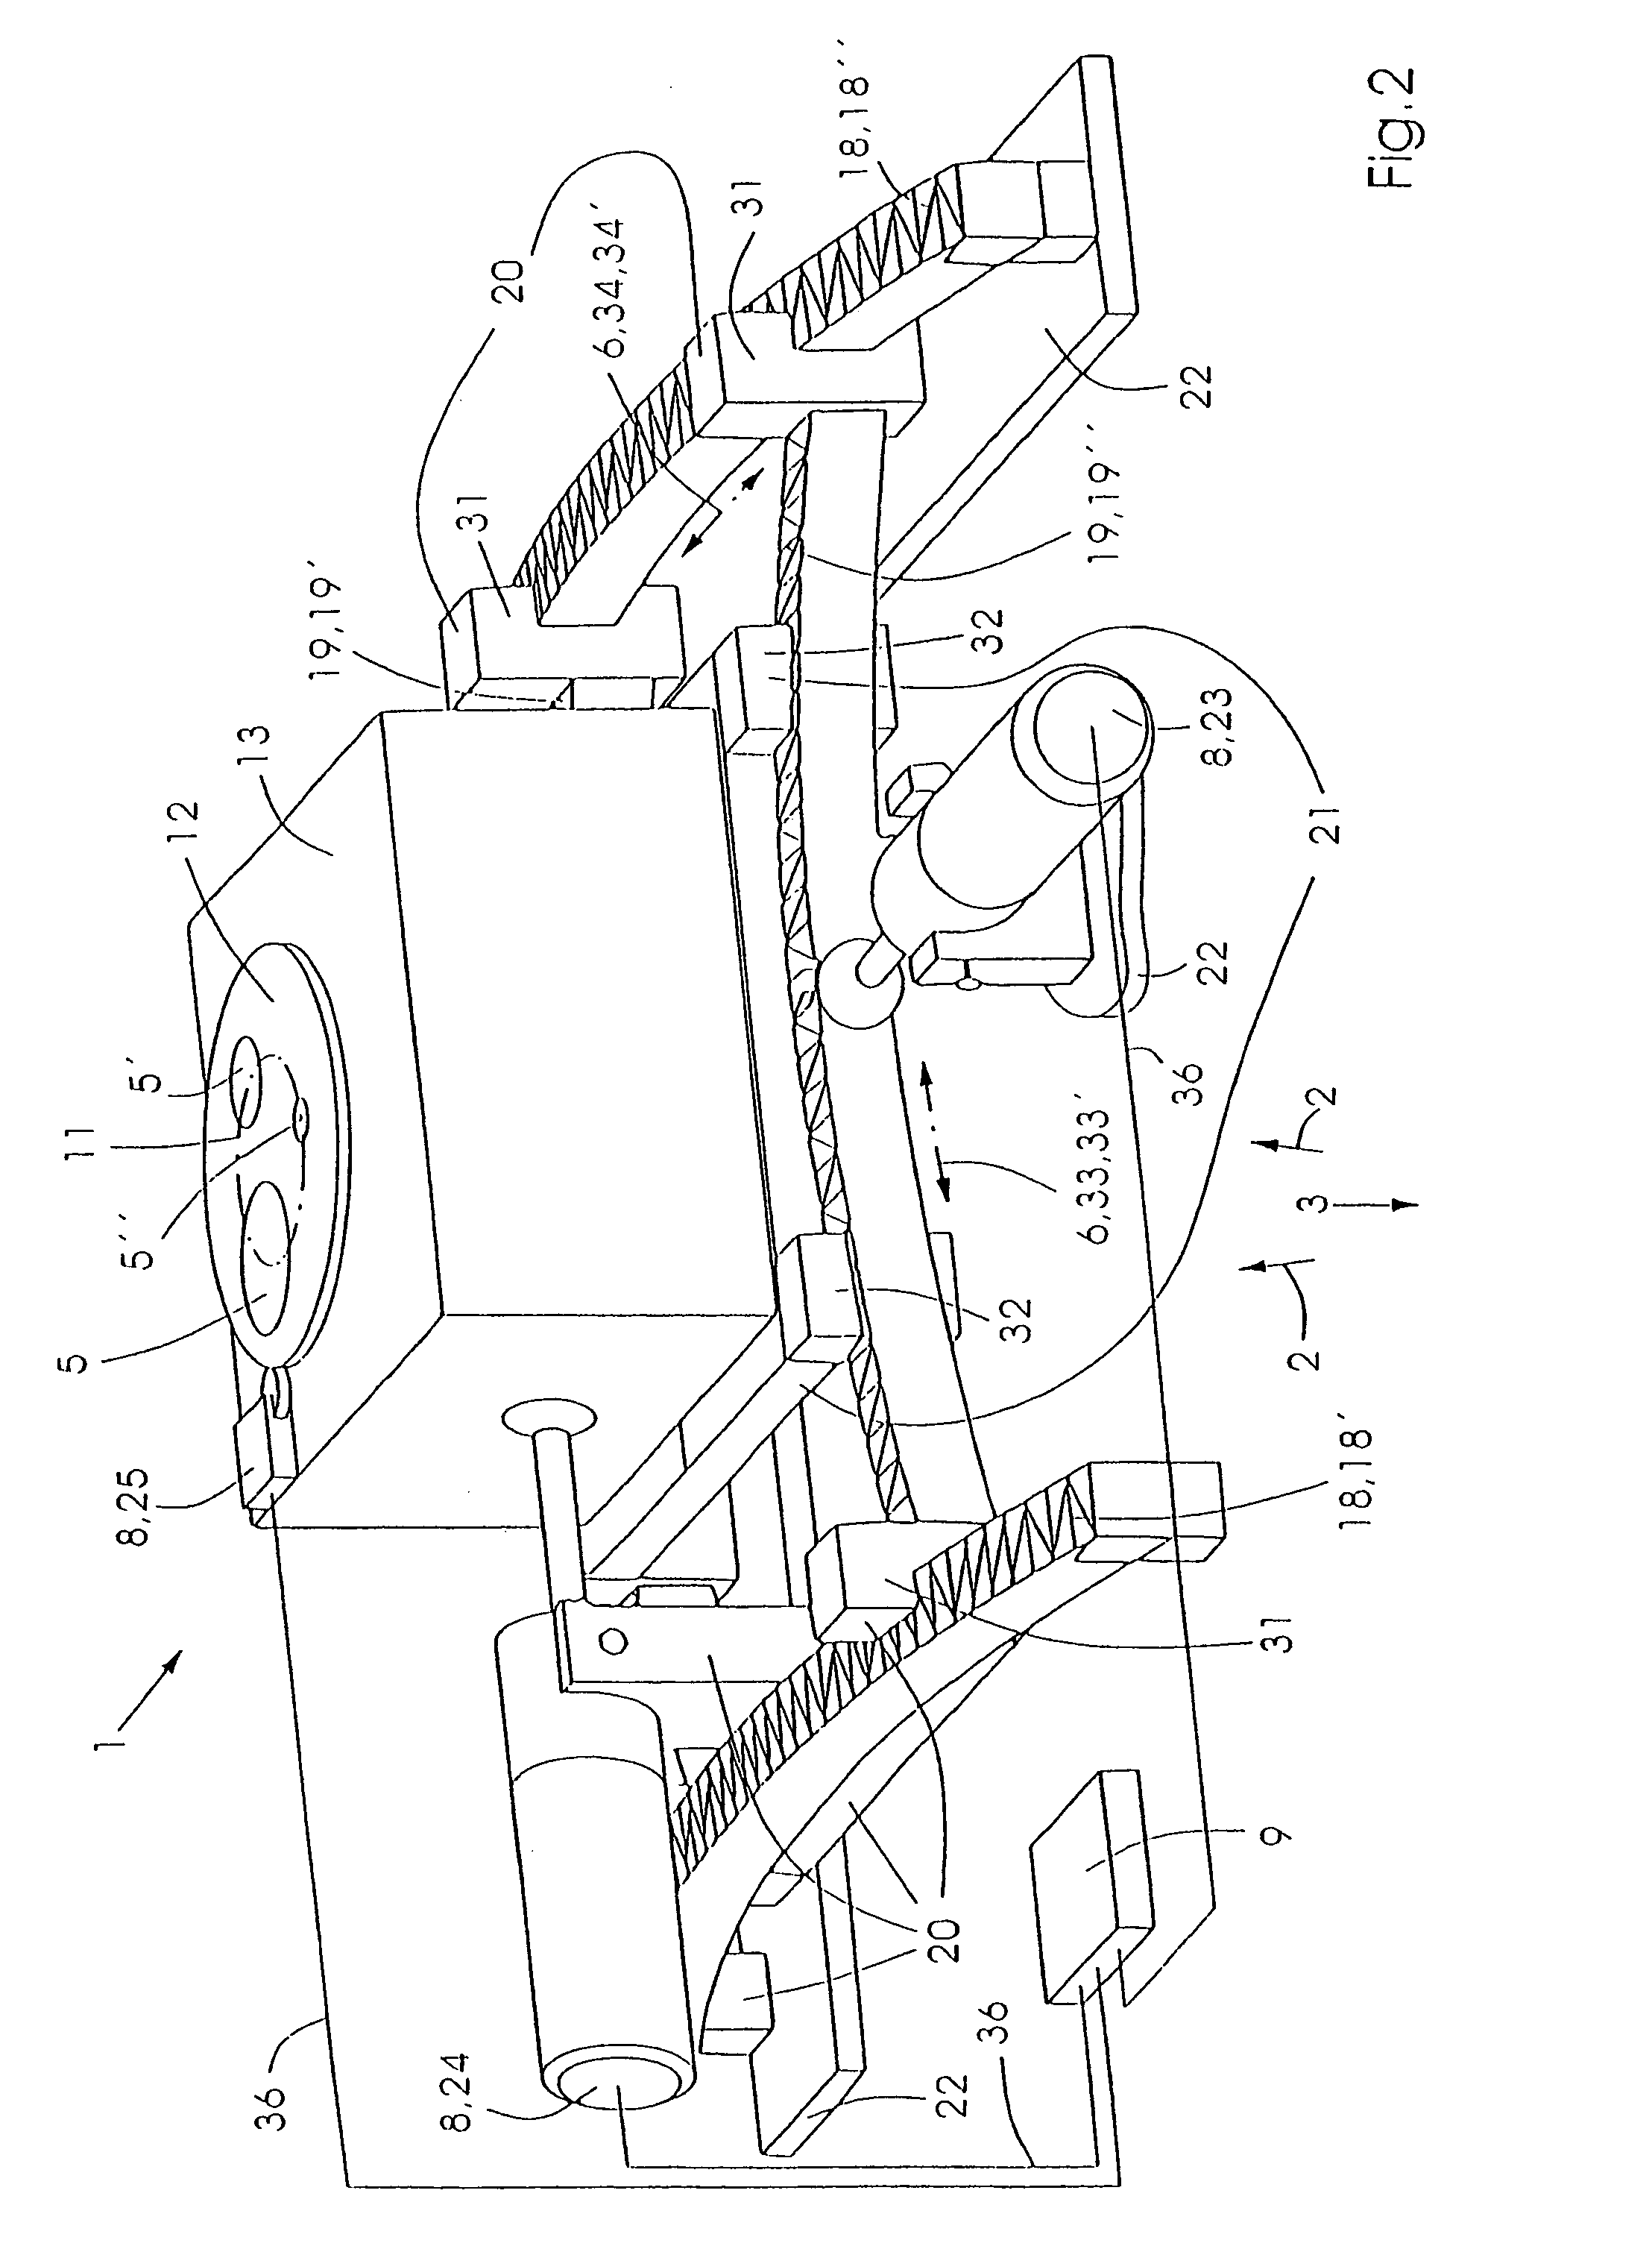 Collimator for high-energy radiation and program for controlling said collimator